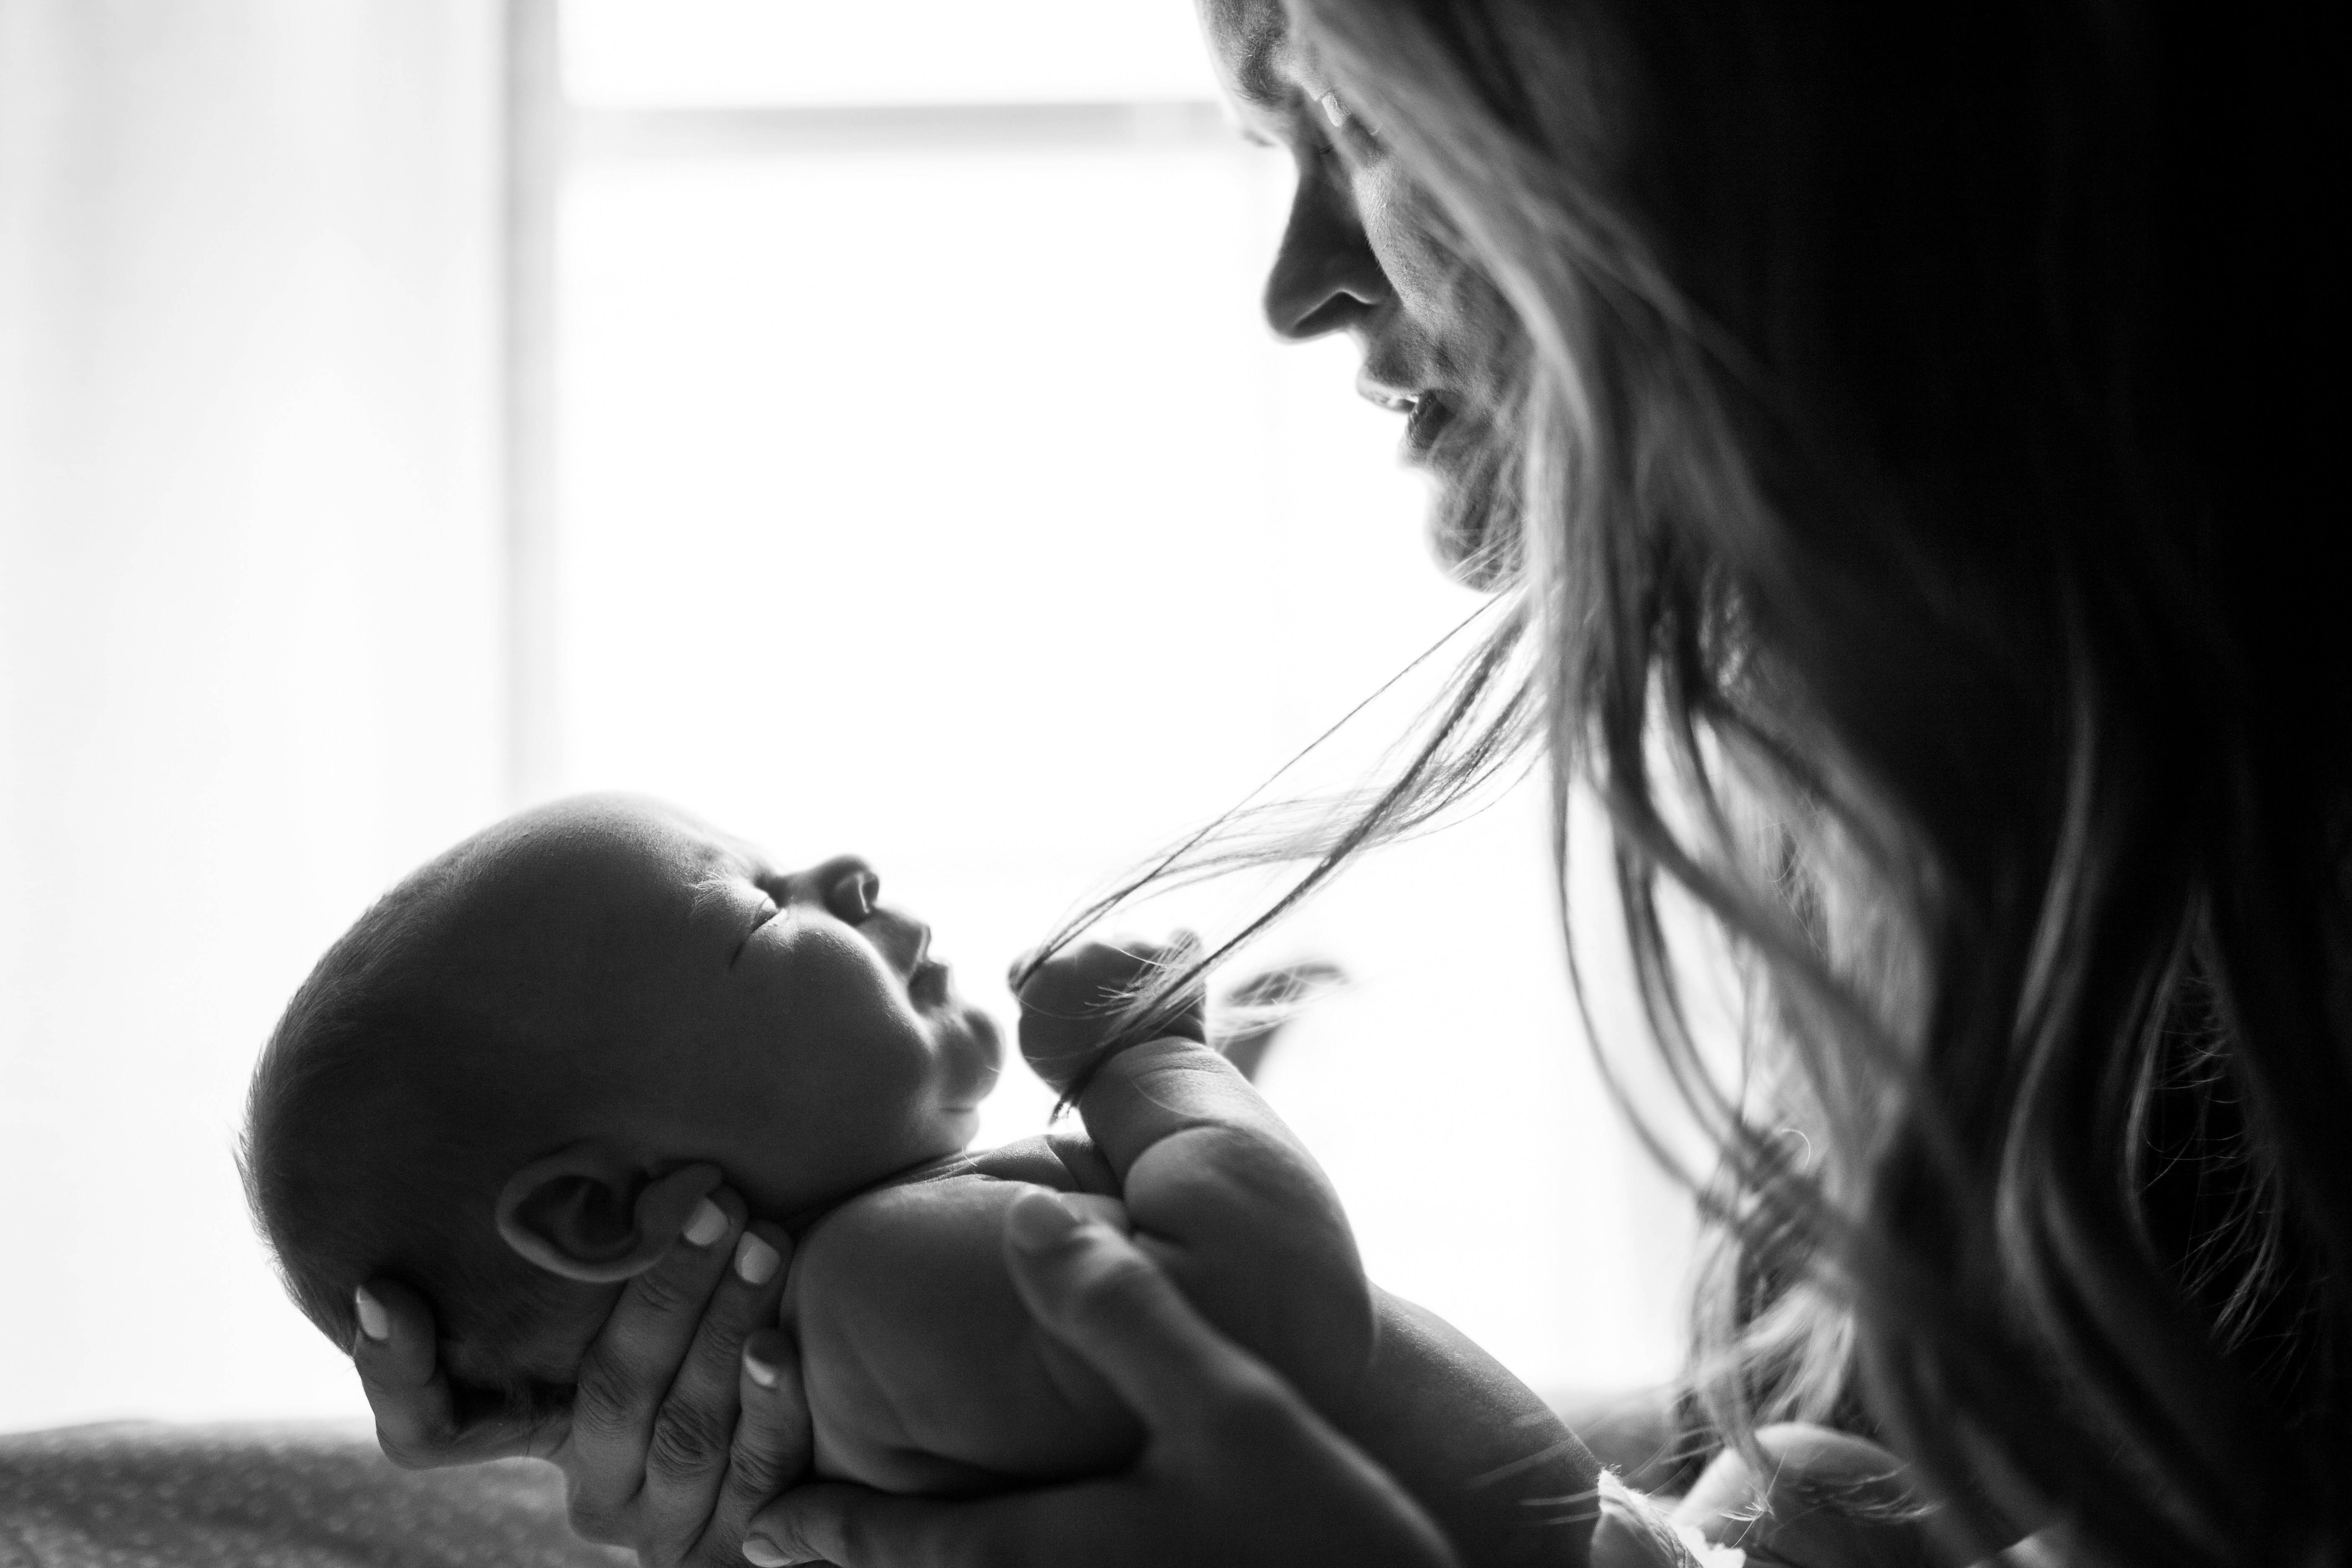 A woman holding a baby | Source: Unsplash